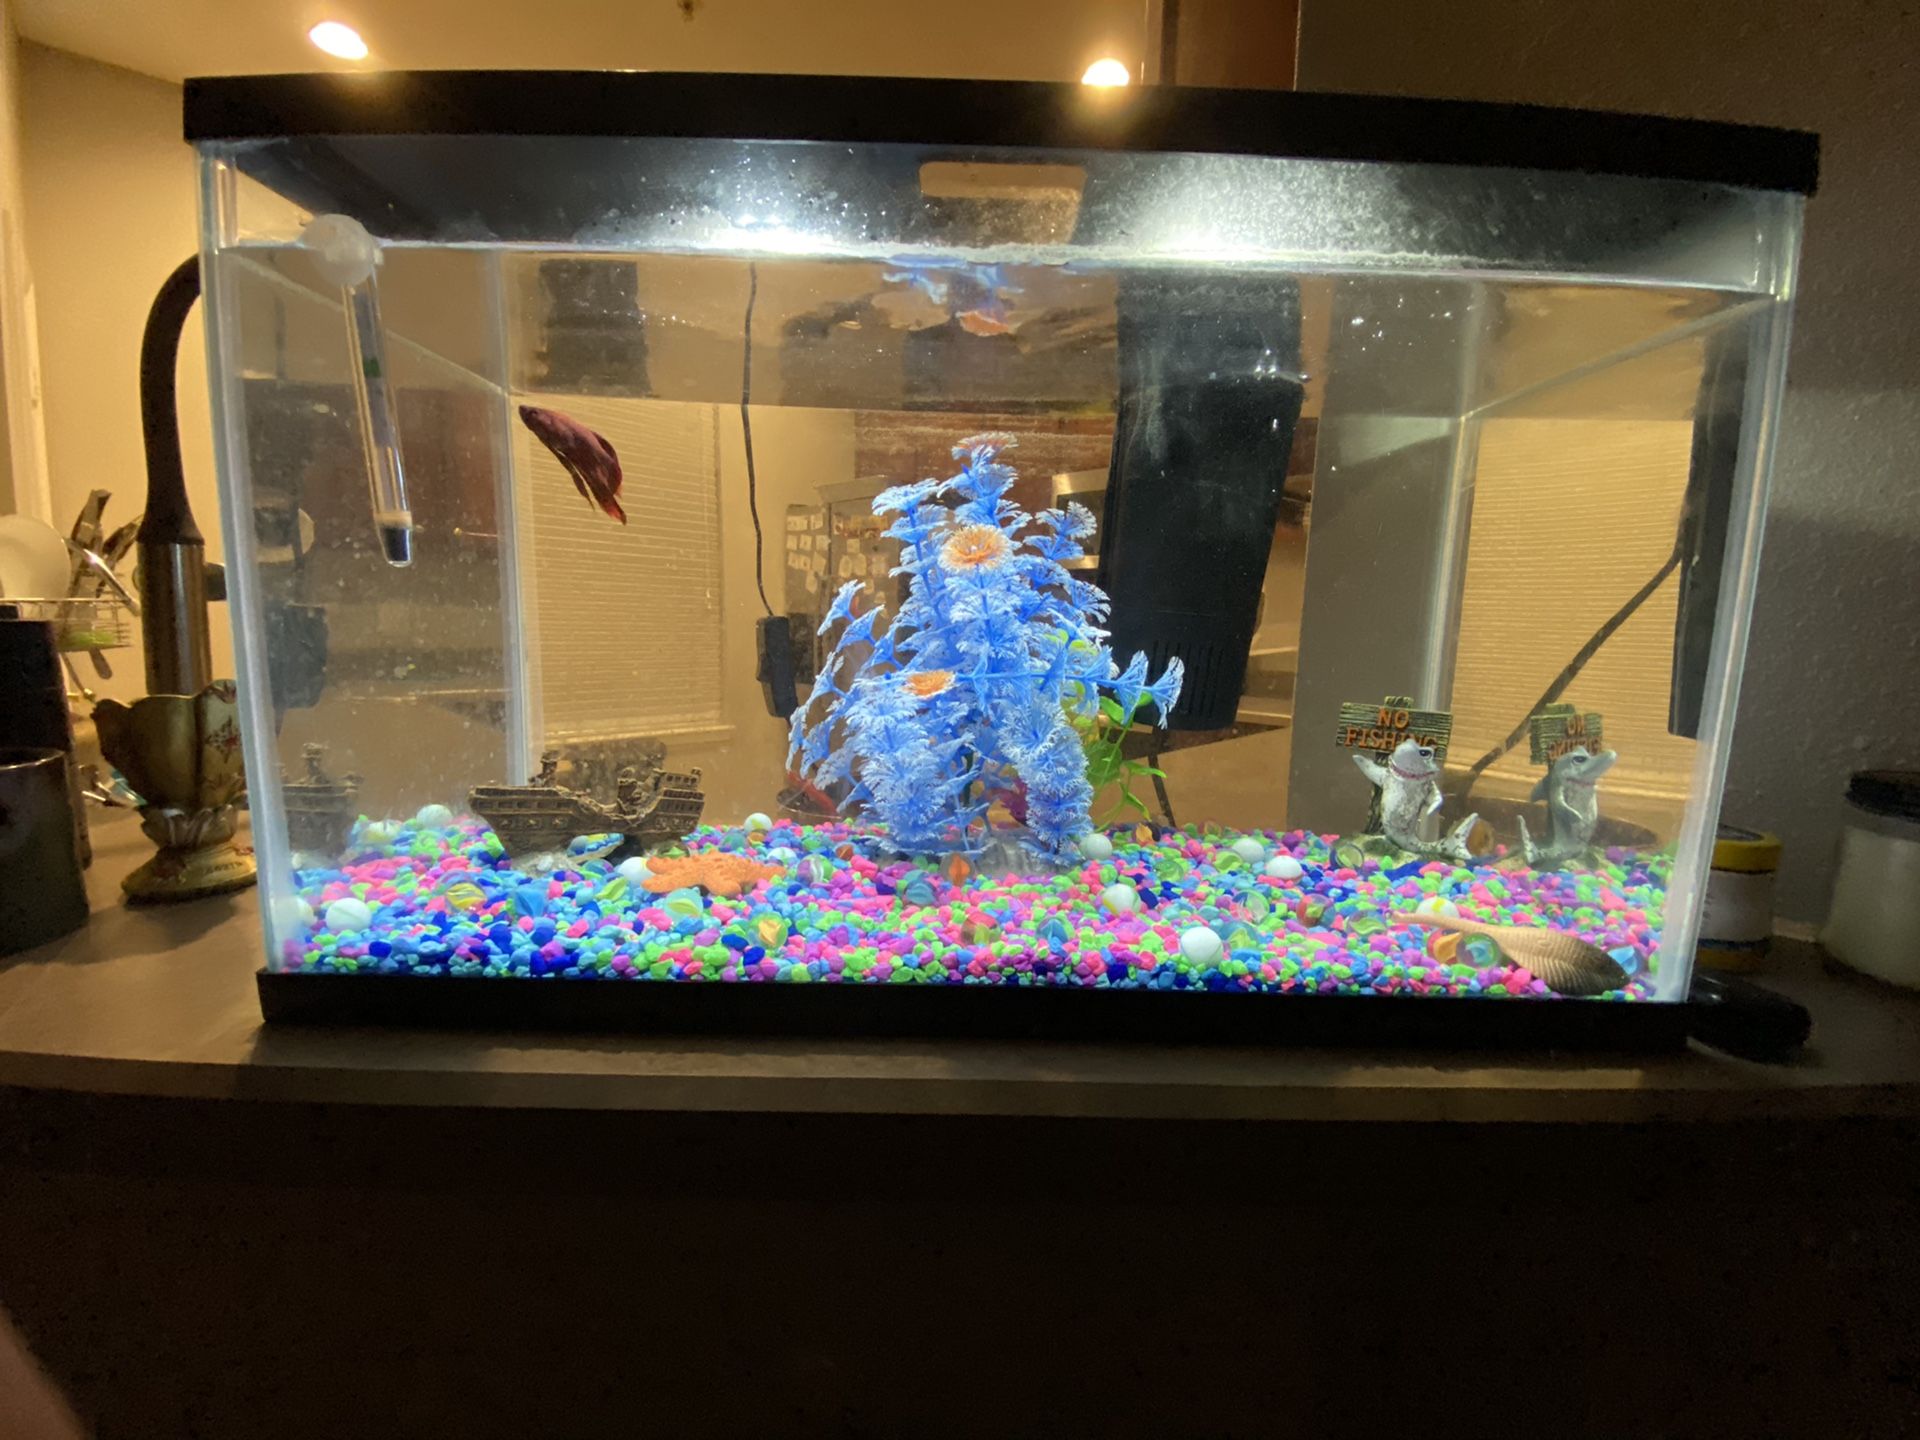 FREE - FISH TANK INCLUDING ACCESSORIES AND FOOD